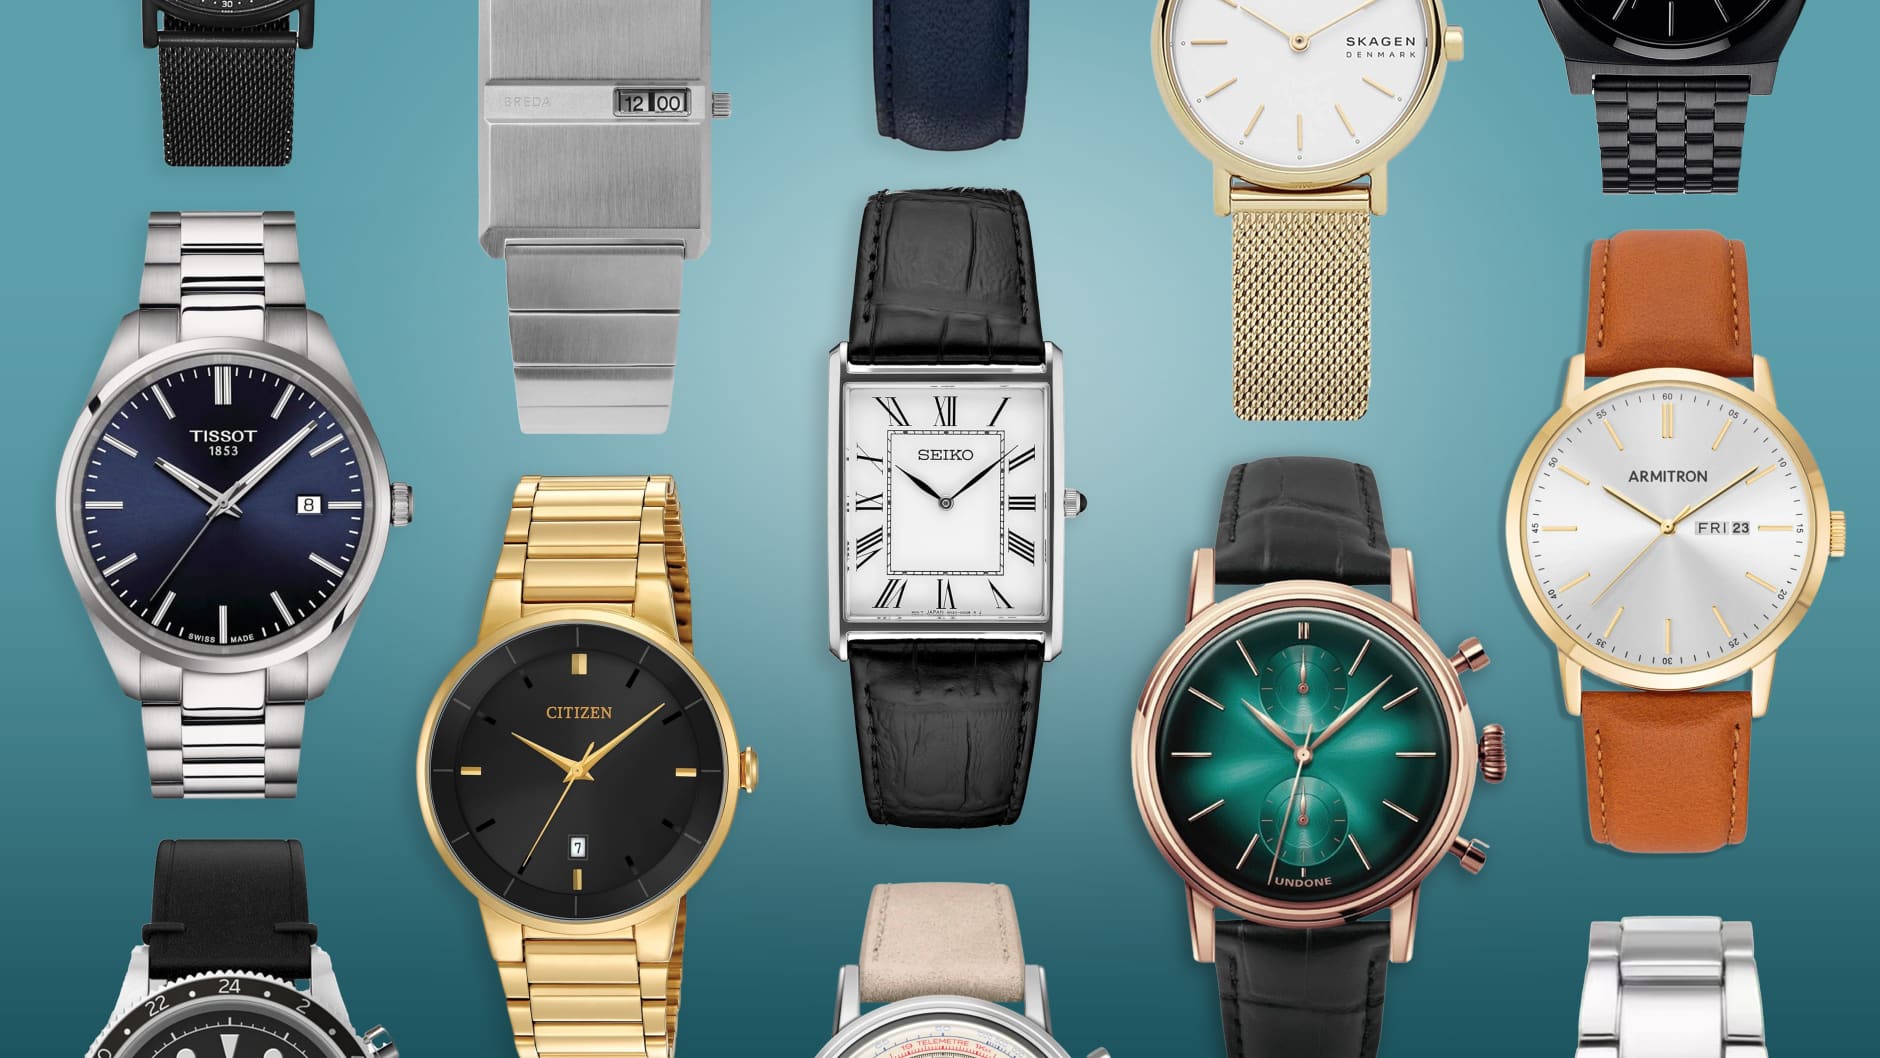 Affordable Watches That Look More Luxe - Buy Side from WSJ